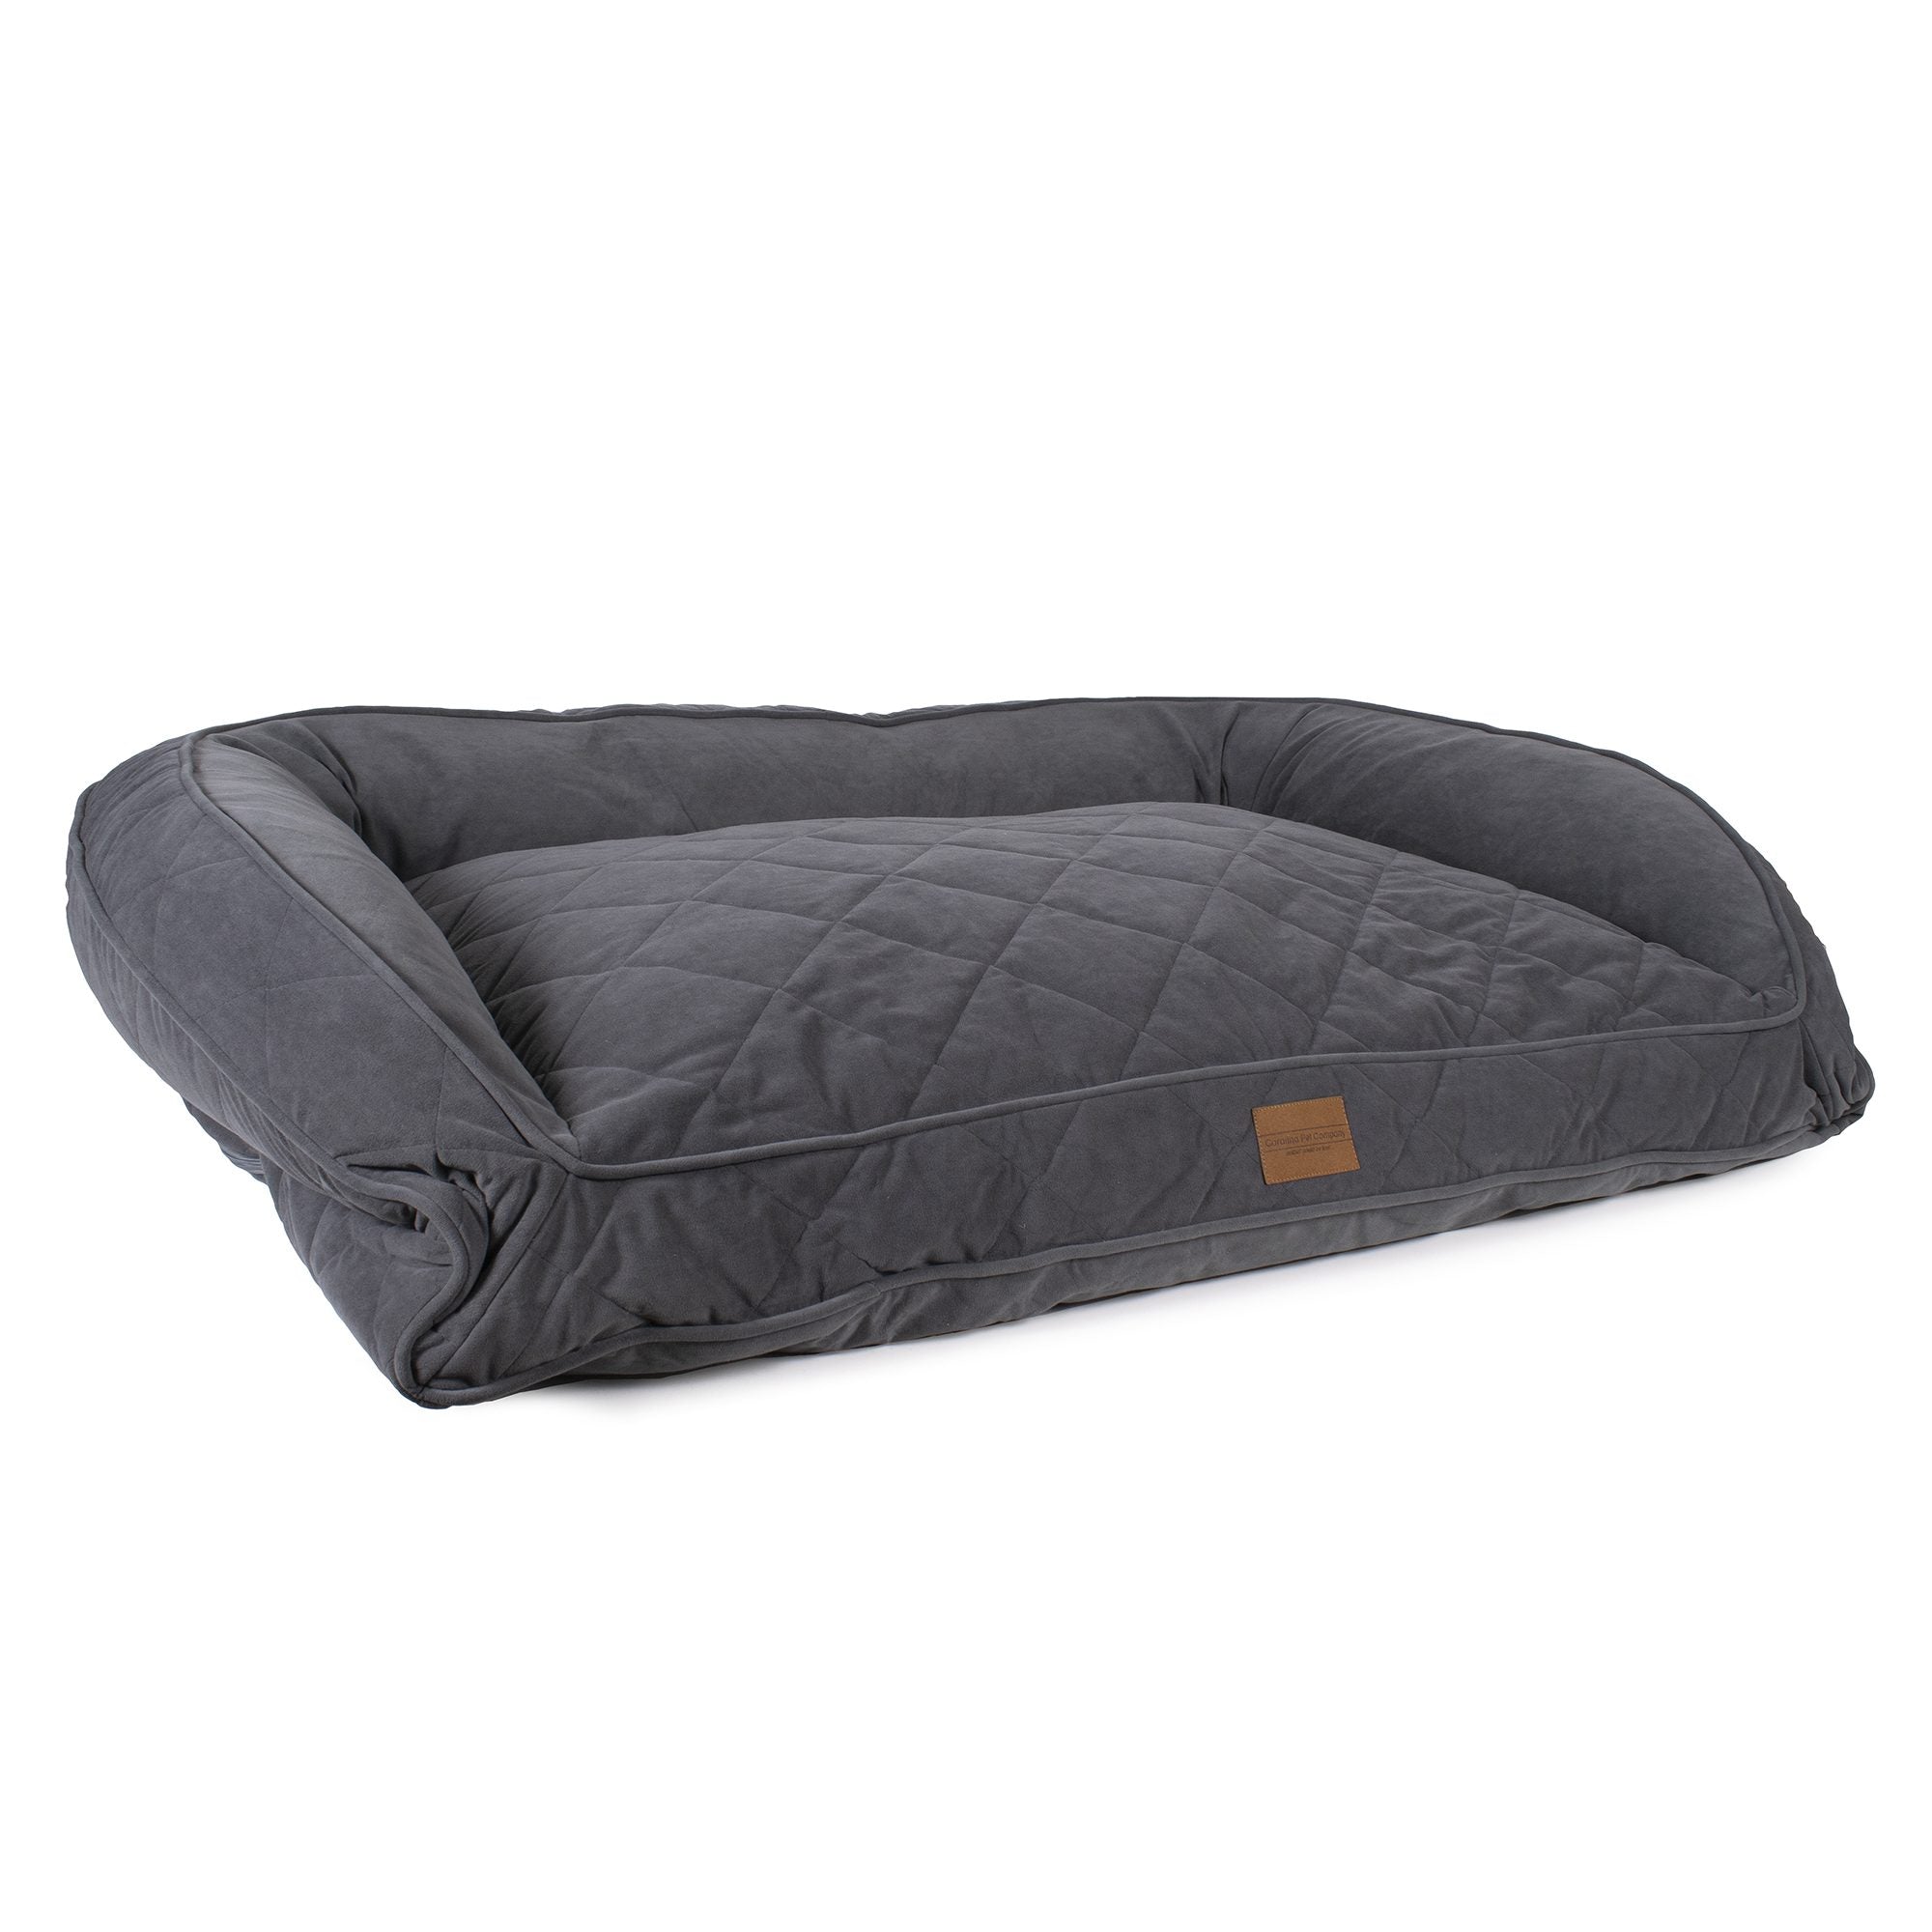 QUILTED-MICROFIBER-ORTHOPEDIC-DOG-BED-CHARCOAL